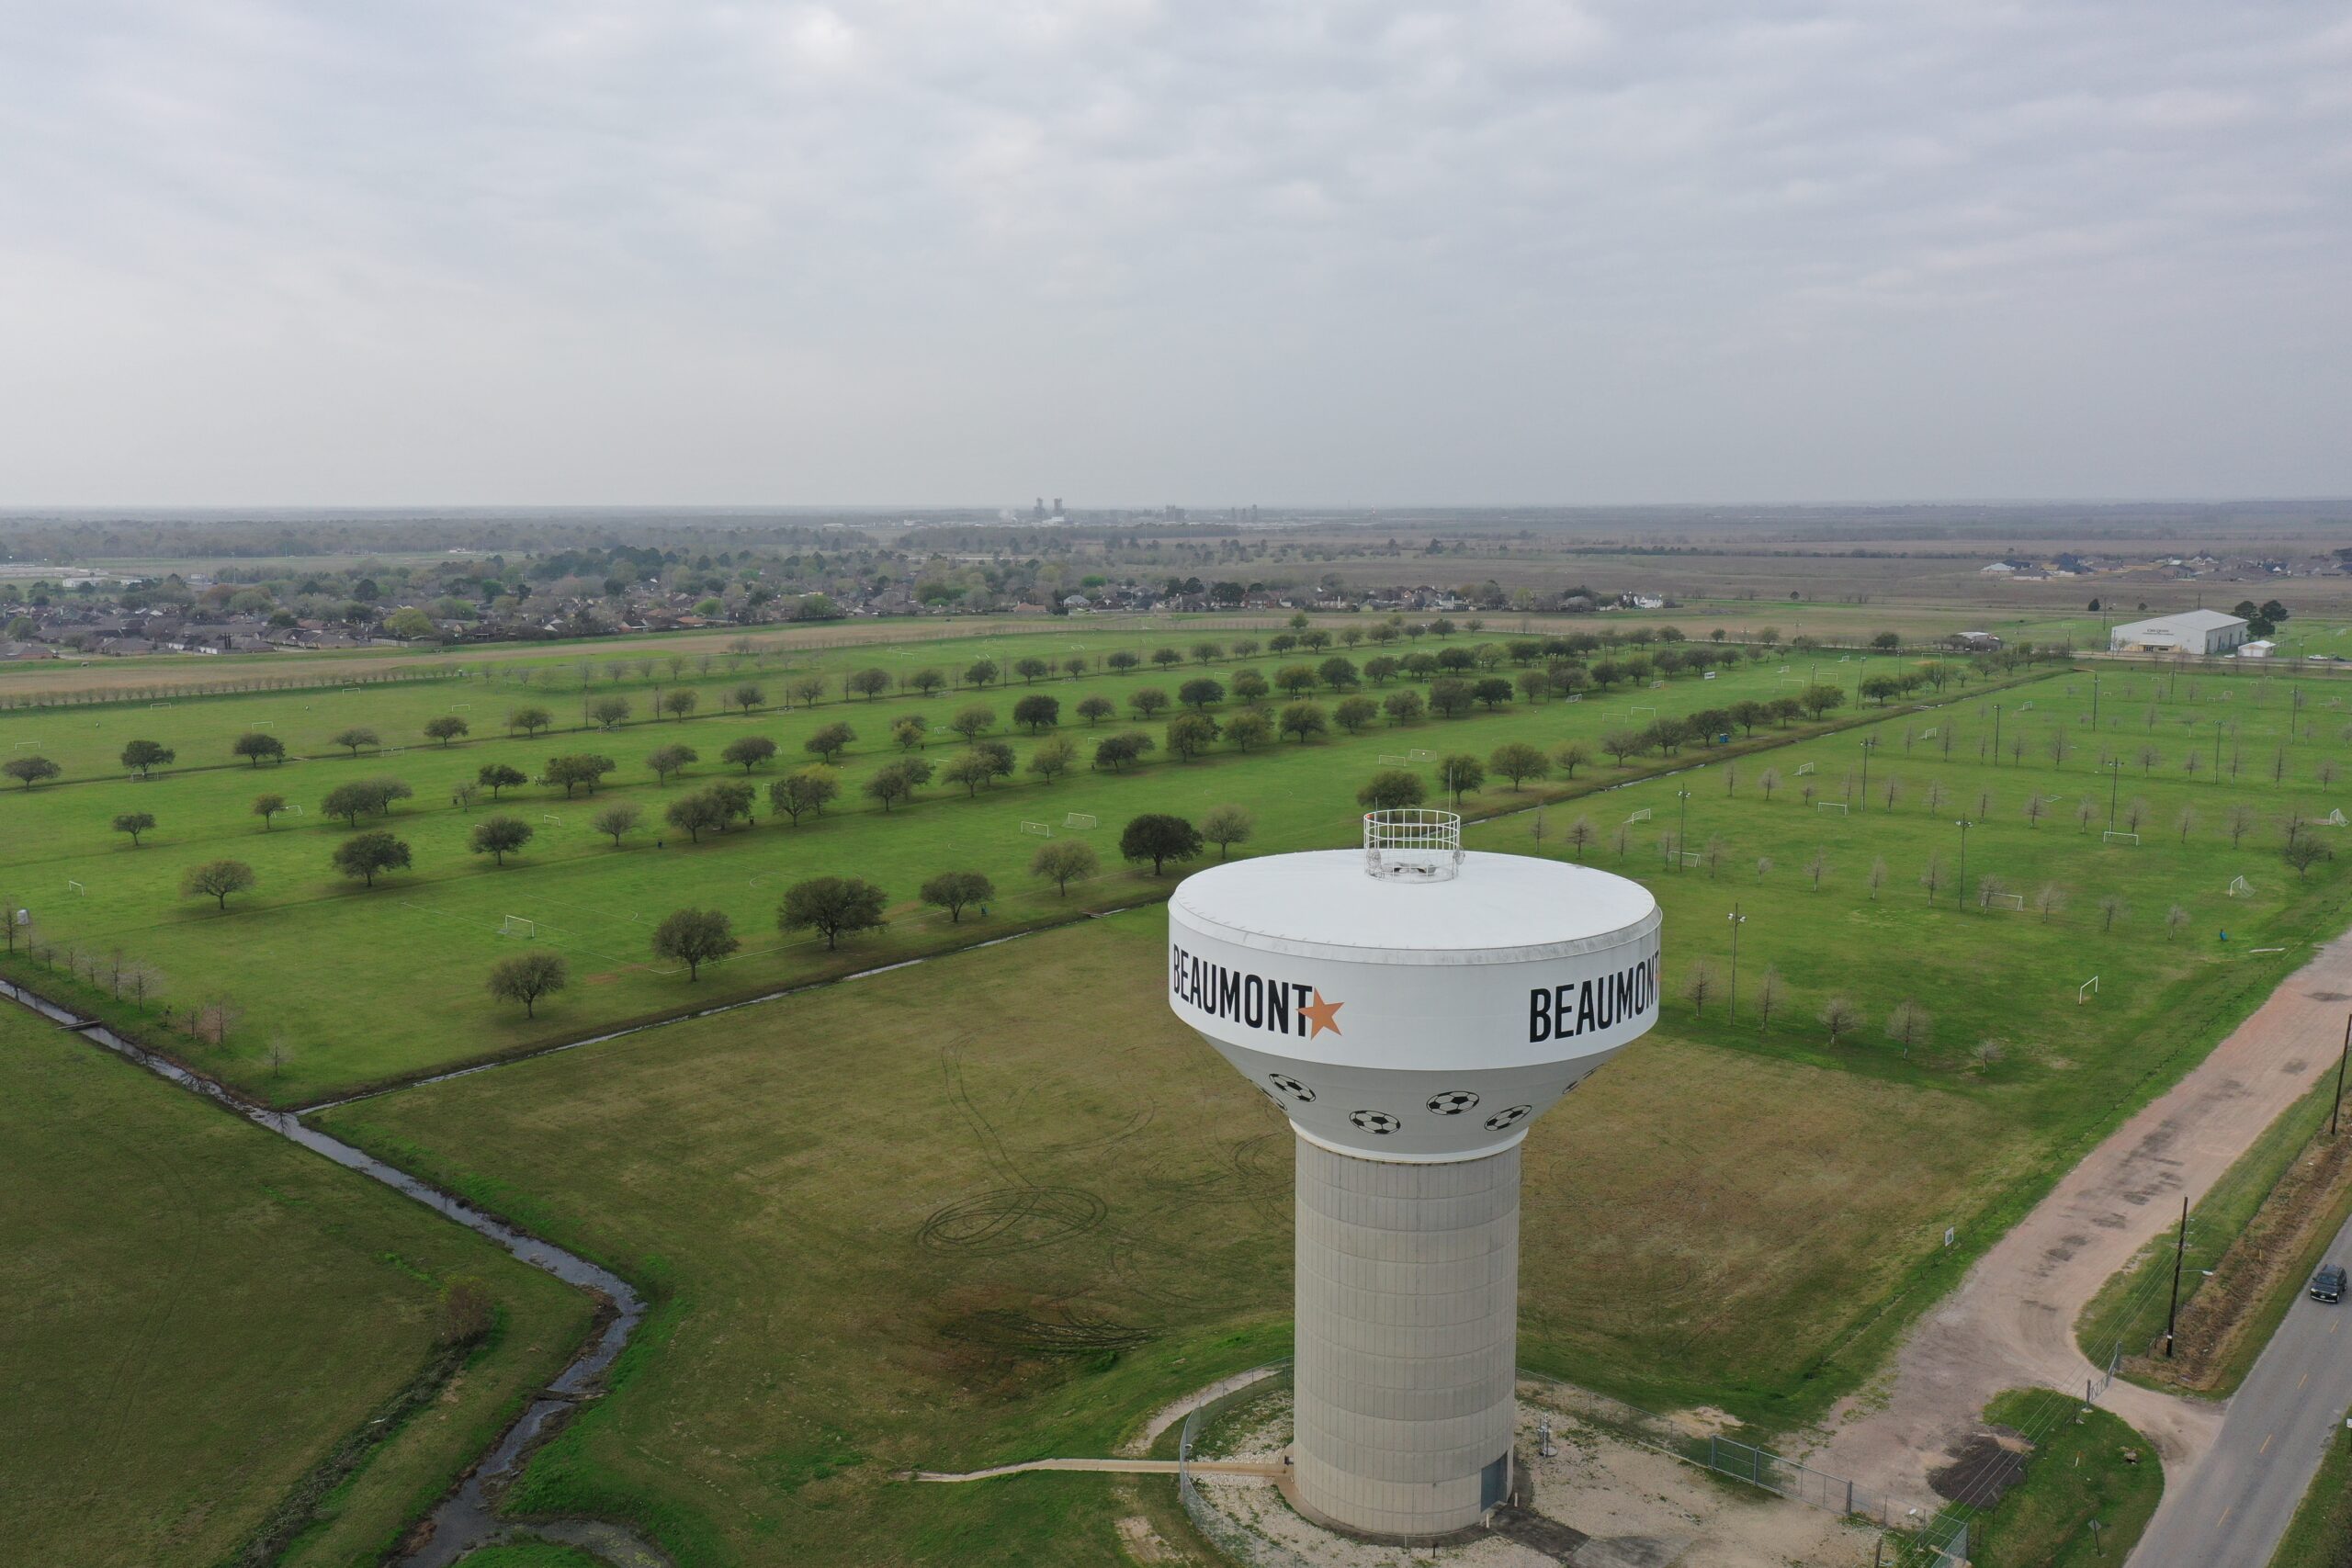 Aerial view of Beaumont water tower